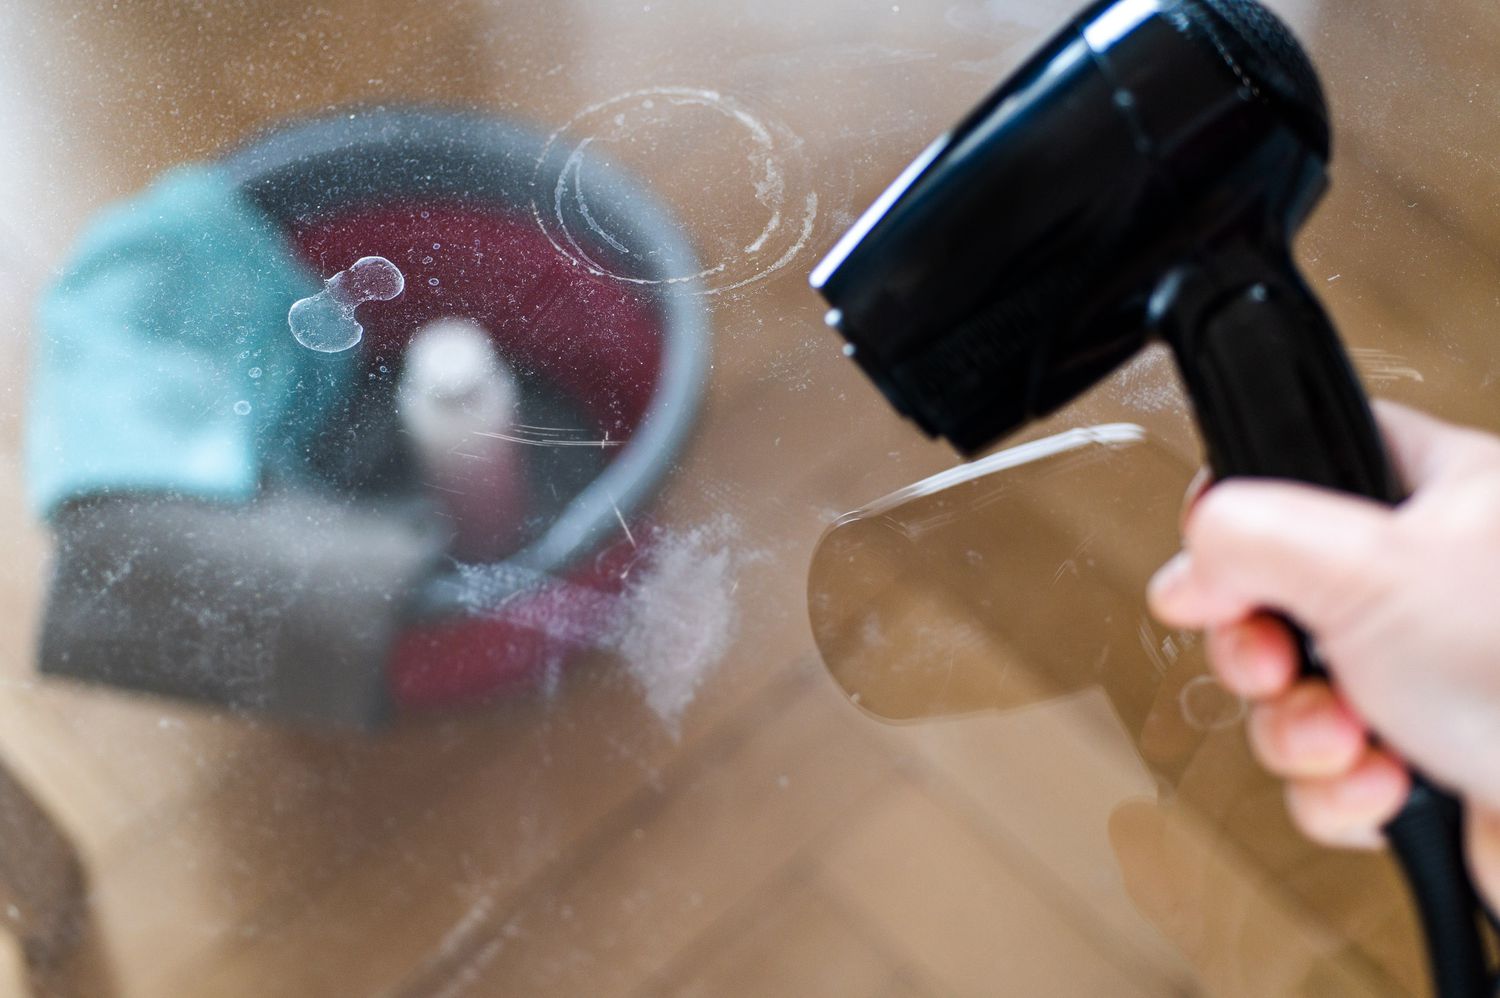 Hair dryer blowing dust of acrylic surface with water marks